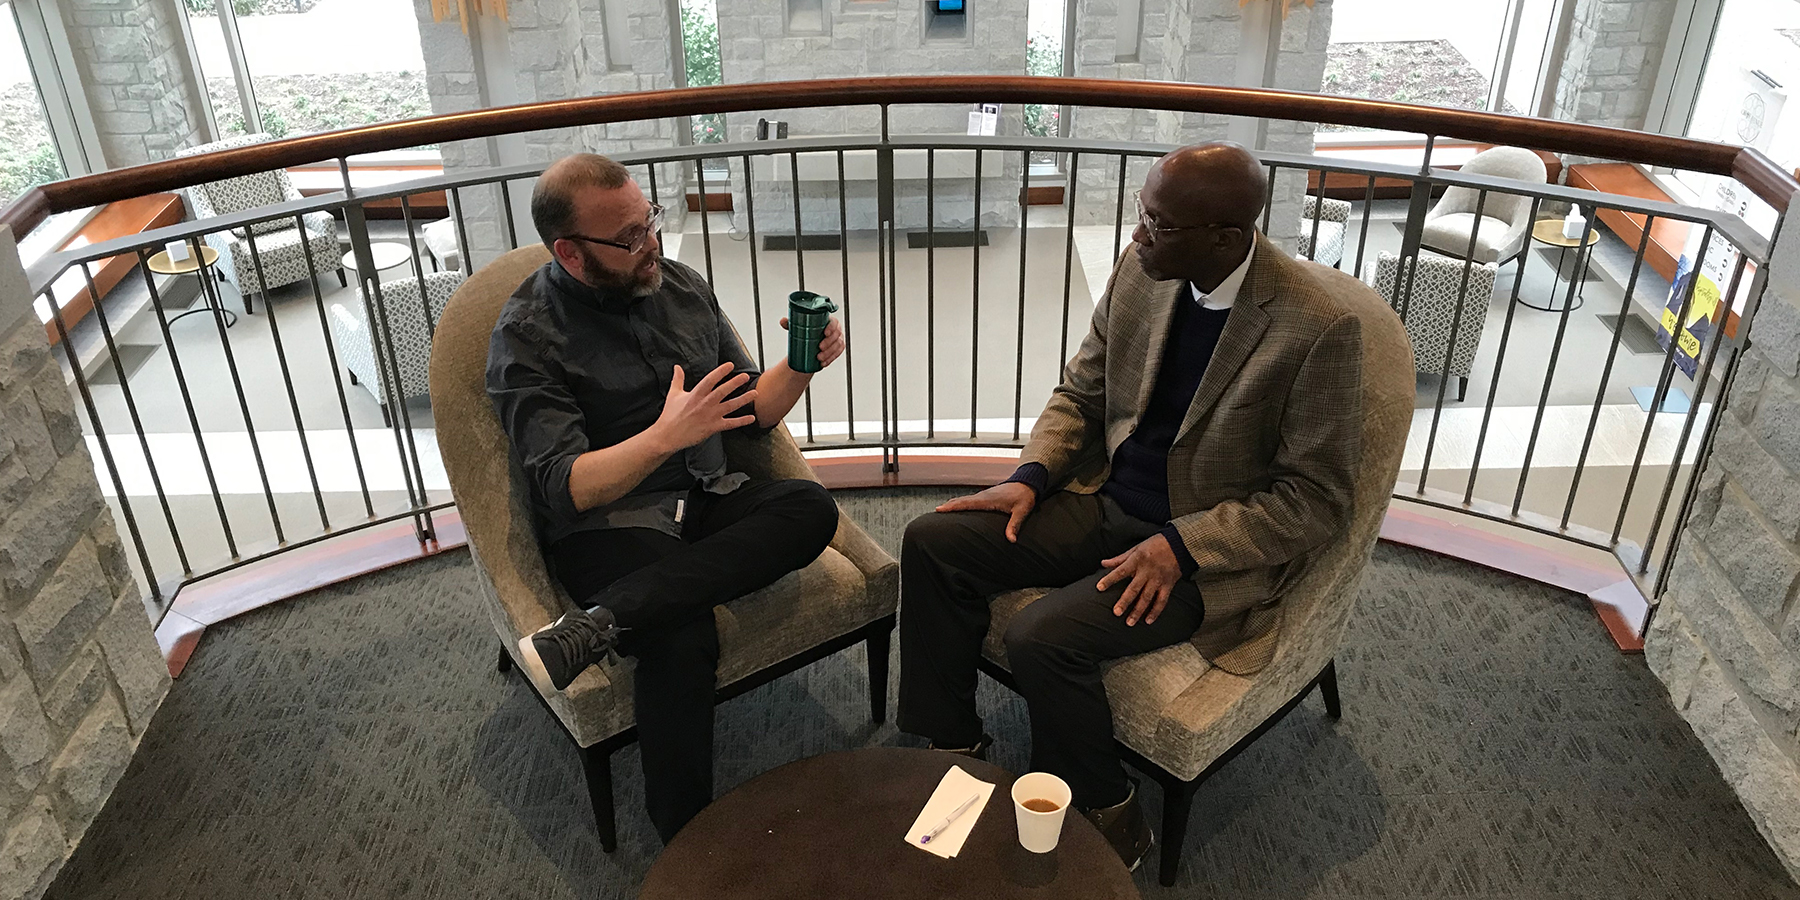 The Rev. Dr. J. Herbert Nelson, II, Stated Clerk of the General Assembly, at right, interviews Presbyterian Disaster Assistance filmmaker David Barnhart during “Coffee with the Clerk.” (Photo by Randy Hobson)